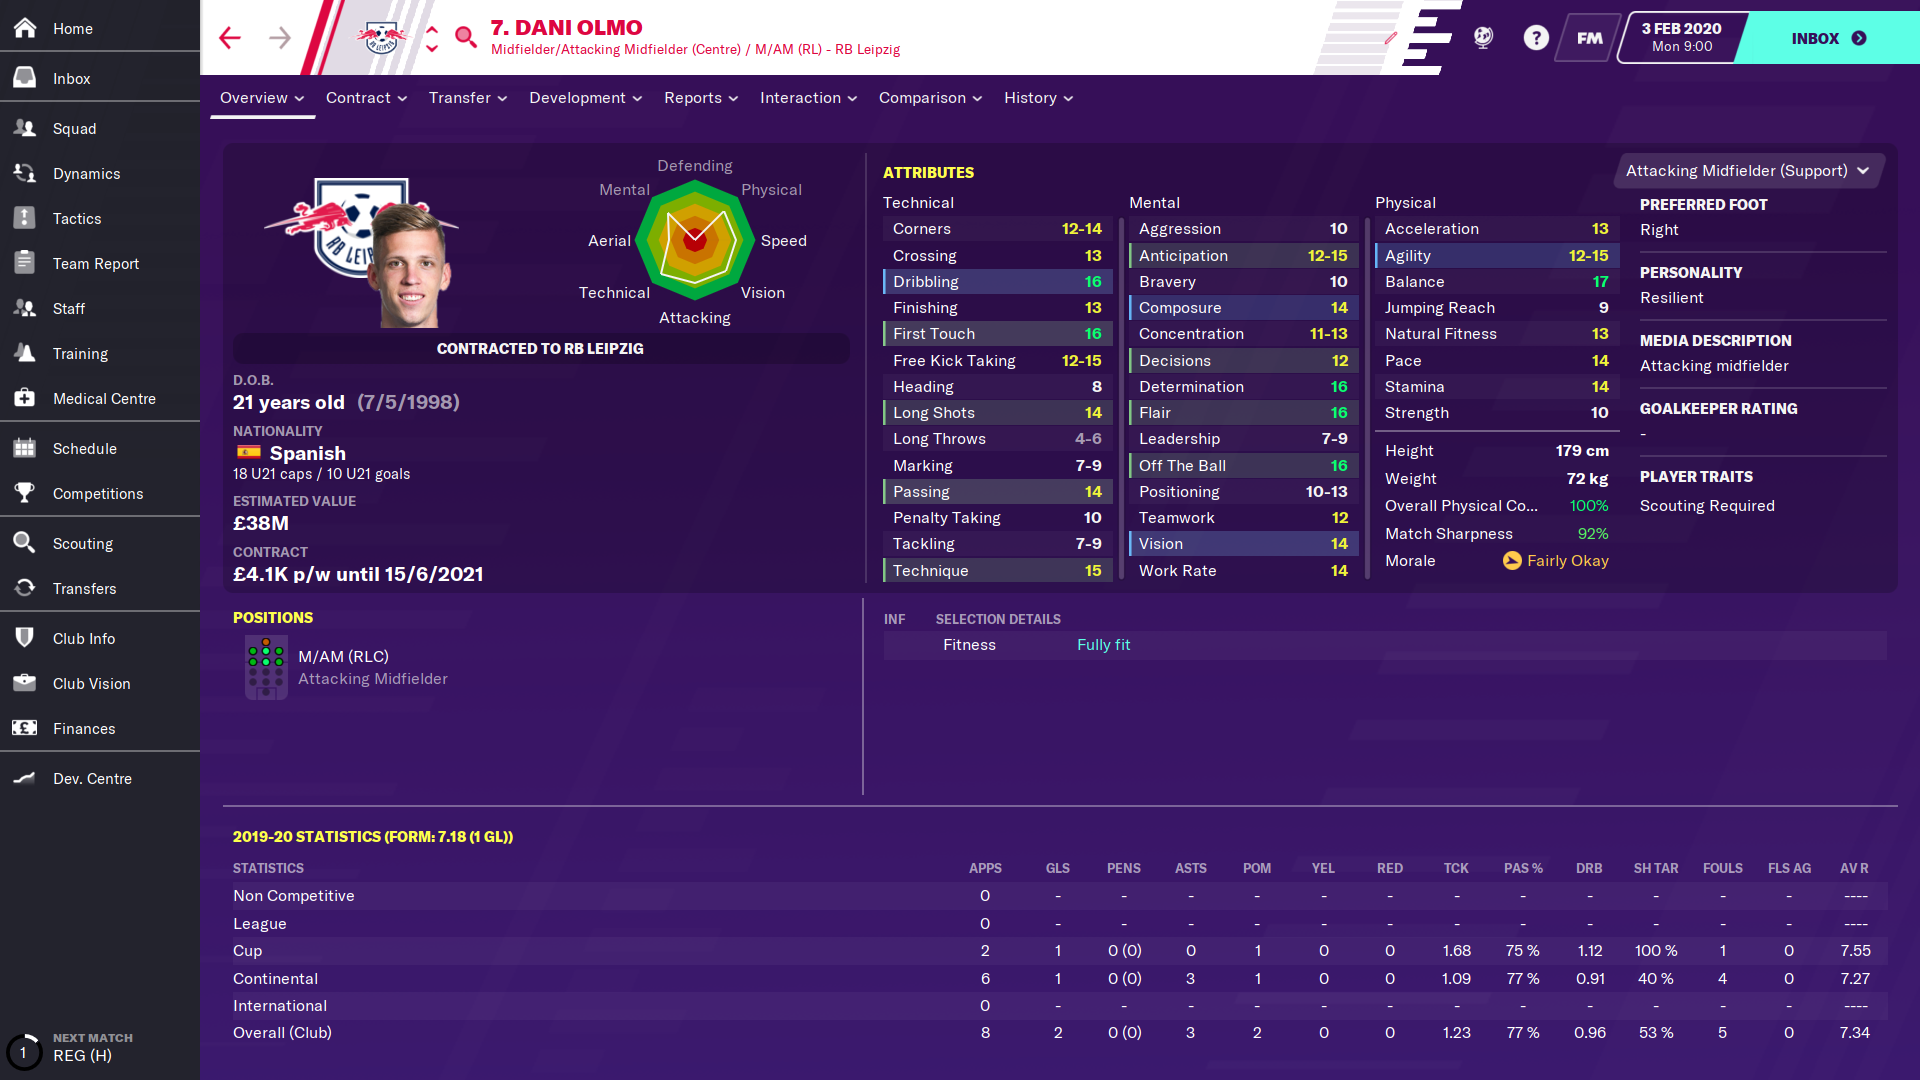 Dani Olmo's profile in Football Manager 2020